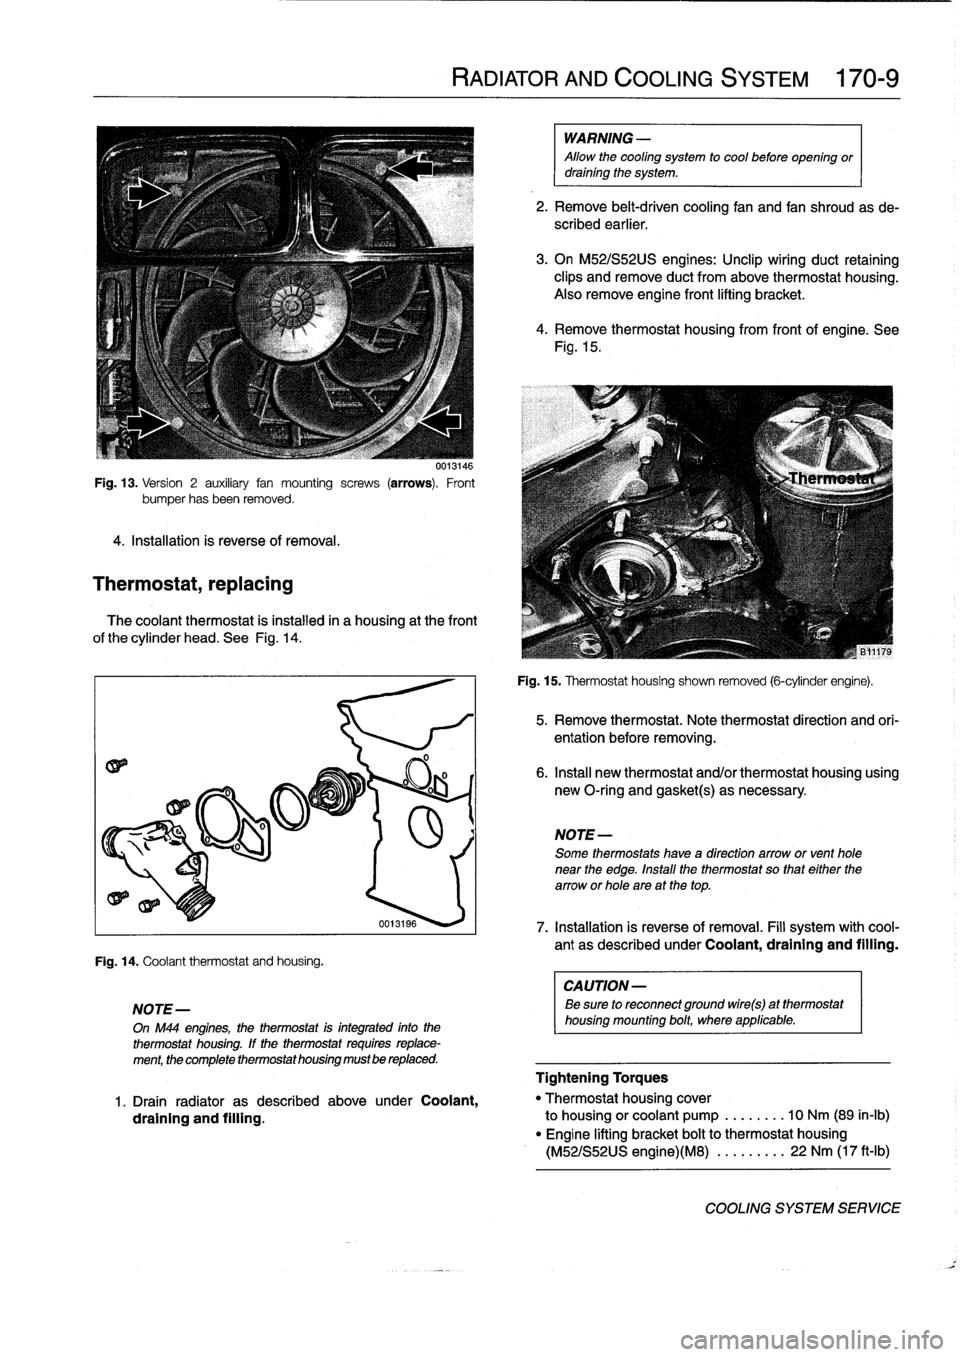 BMW 318i 1997 E36 Workshop Manual 
Fig
.
13
.
Version
2
auxiliary
fan
mounting
screws
(arrows)
.
Front
bumper
hasbeen
removed
.

4
.
Installation
is
reverse
of
removal
.

Thermostat,
replacing

0013146

The
coolant
thermostat
is
insta